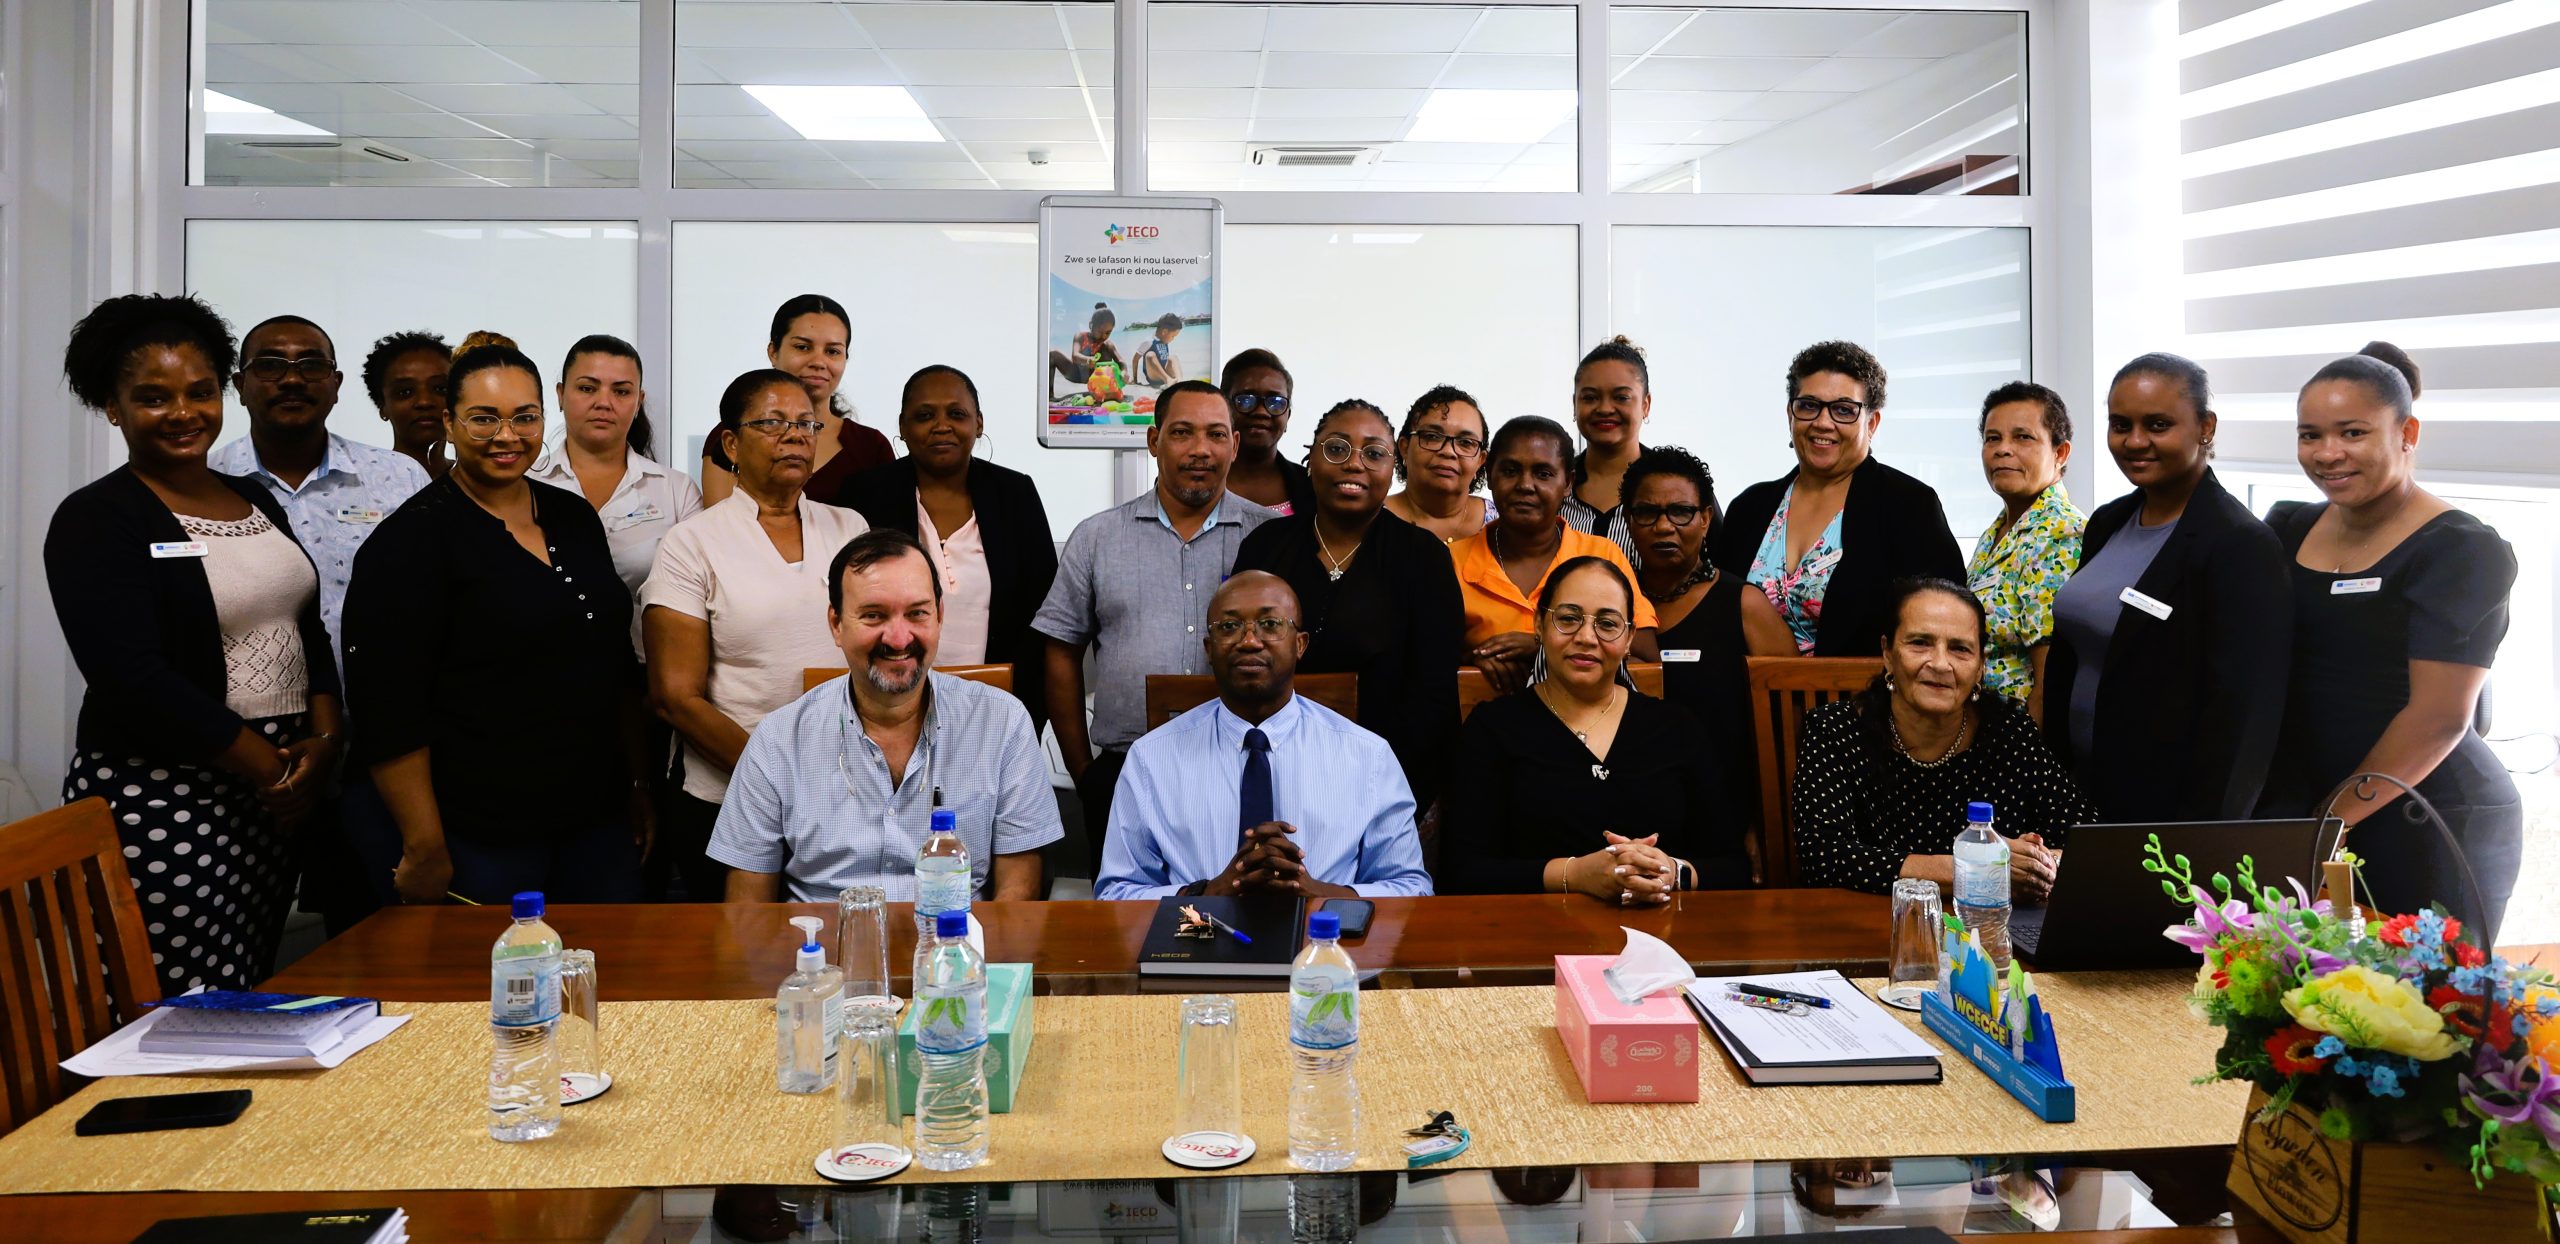 EDUCATION MINISTER, DR. JUSTIN VALENTIN EXTENDS FULL SUPPORT TO IECD’S INTERNATIONAL MANDATE, INSPIRES STAFF DURING NEW YEAR/COURTESY VISIT AT THE INSTITUTE